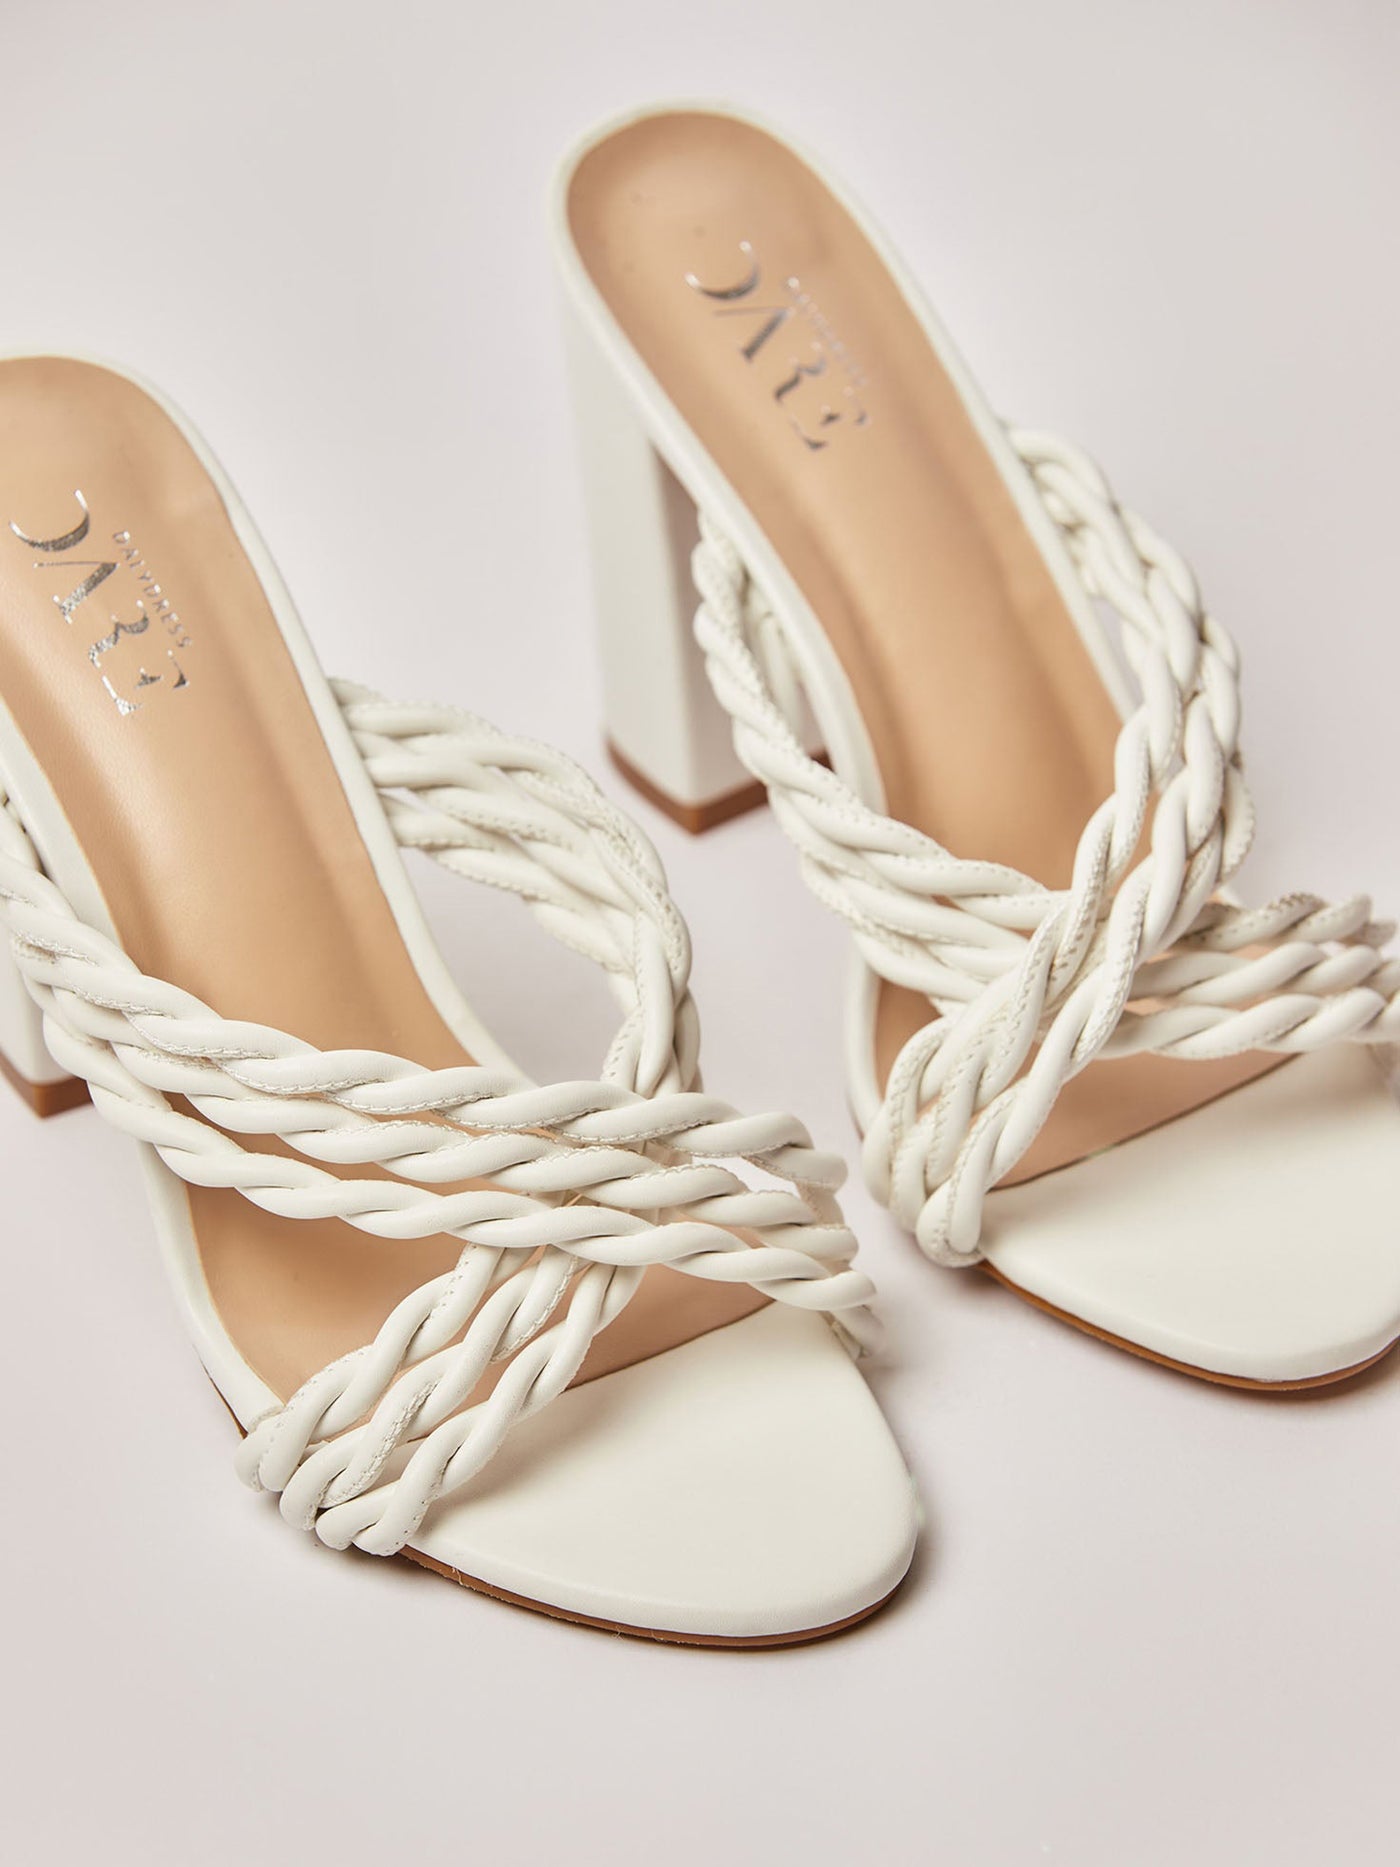 Slipper - With Heels - Braided Criss Cross Straps